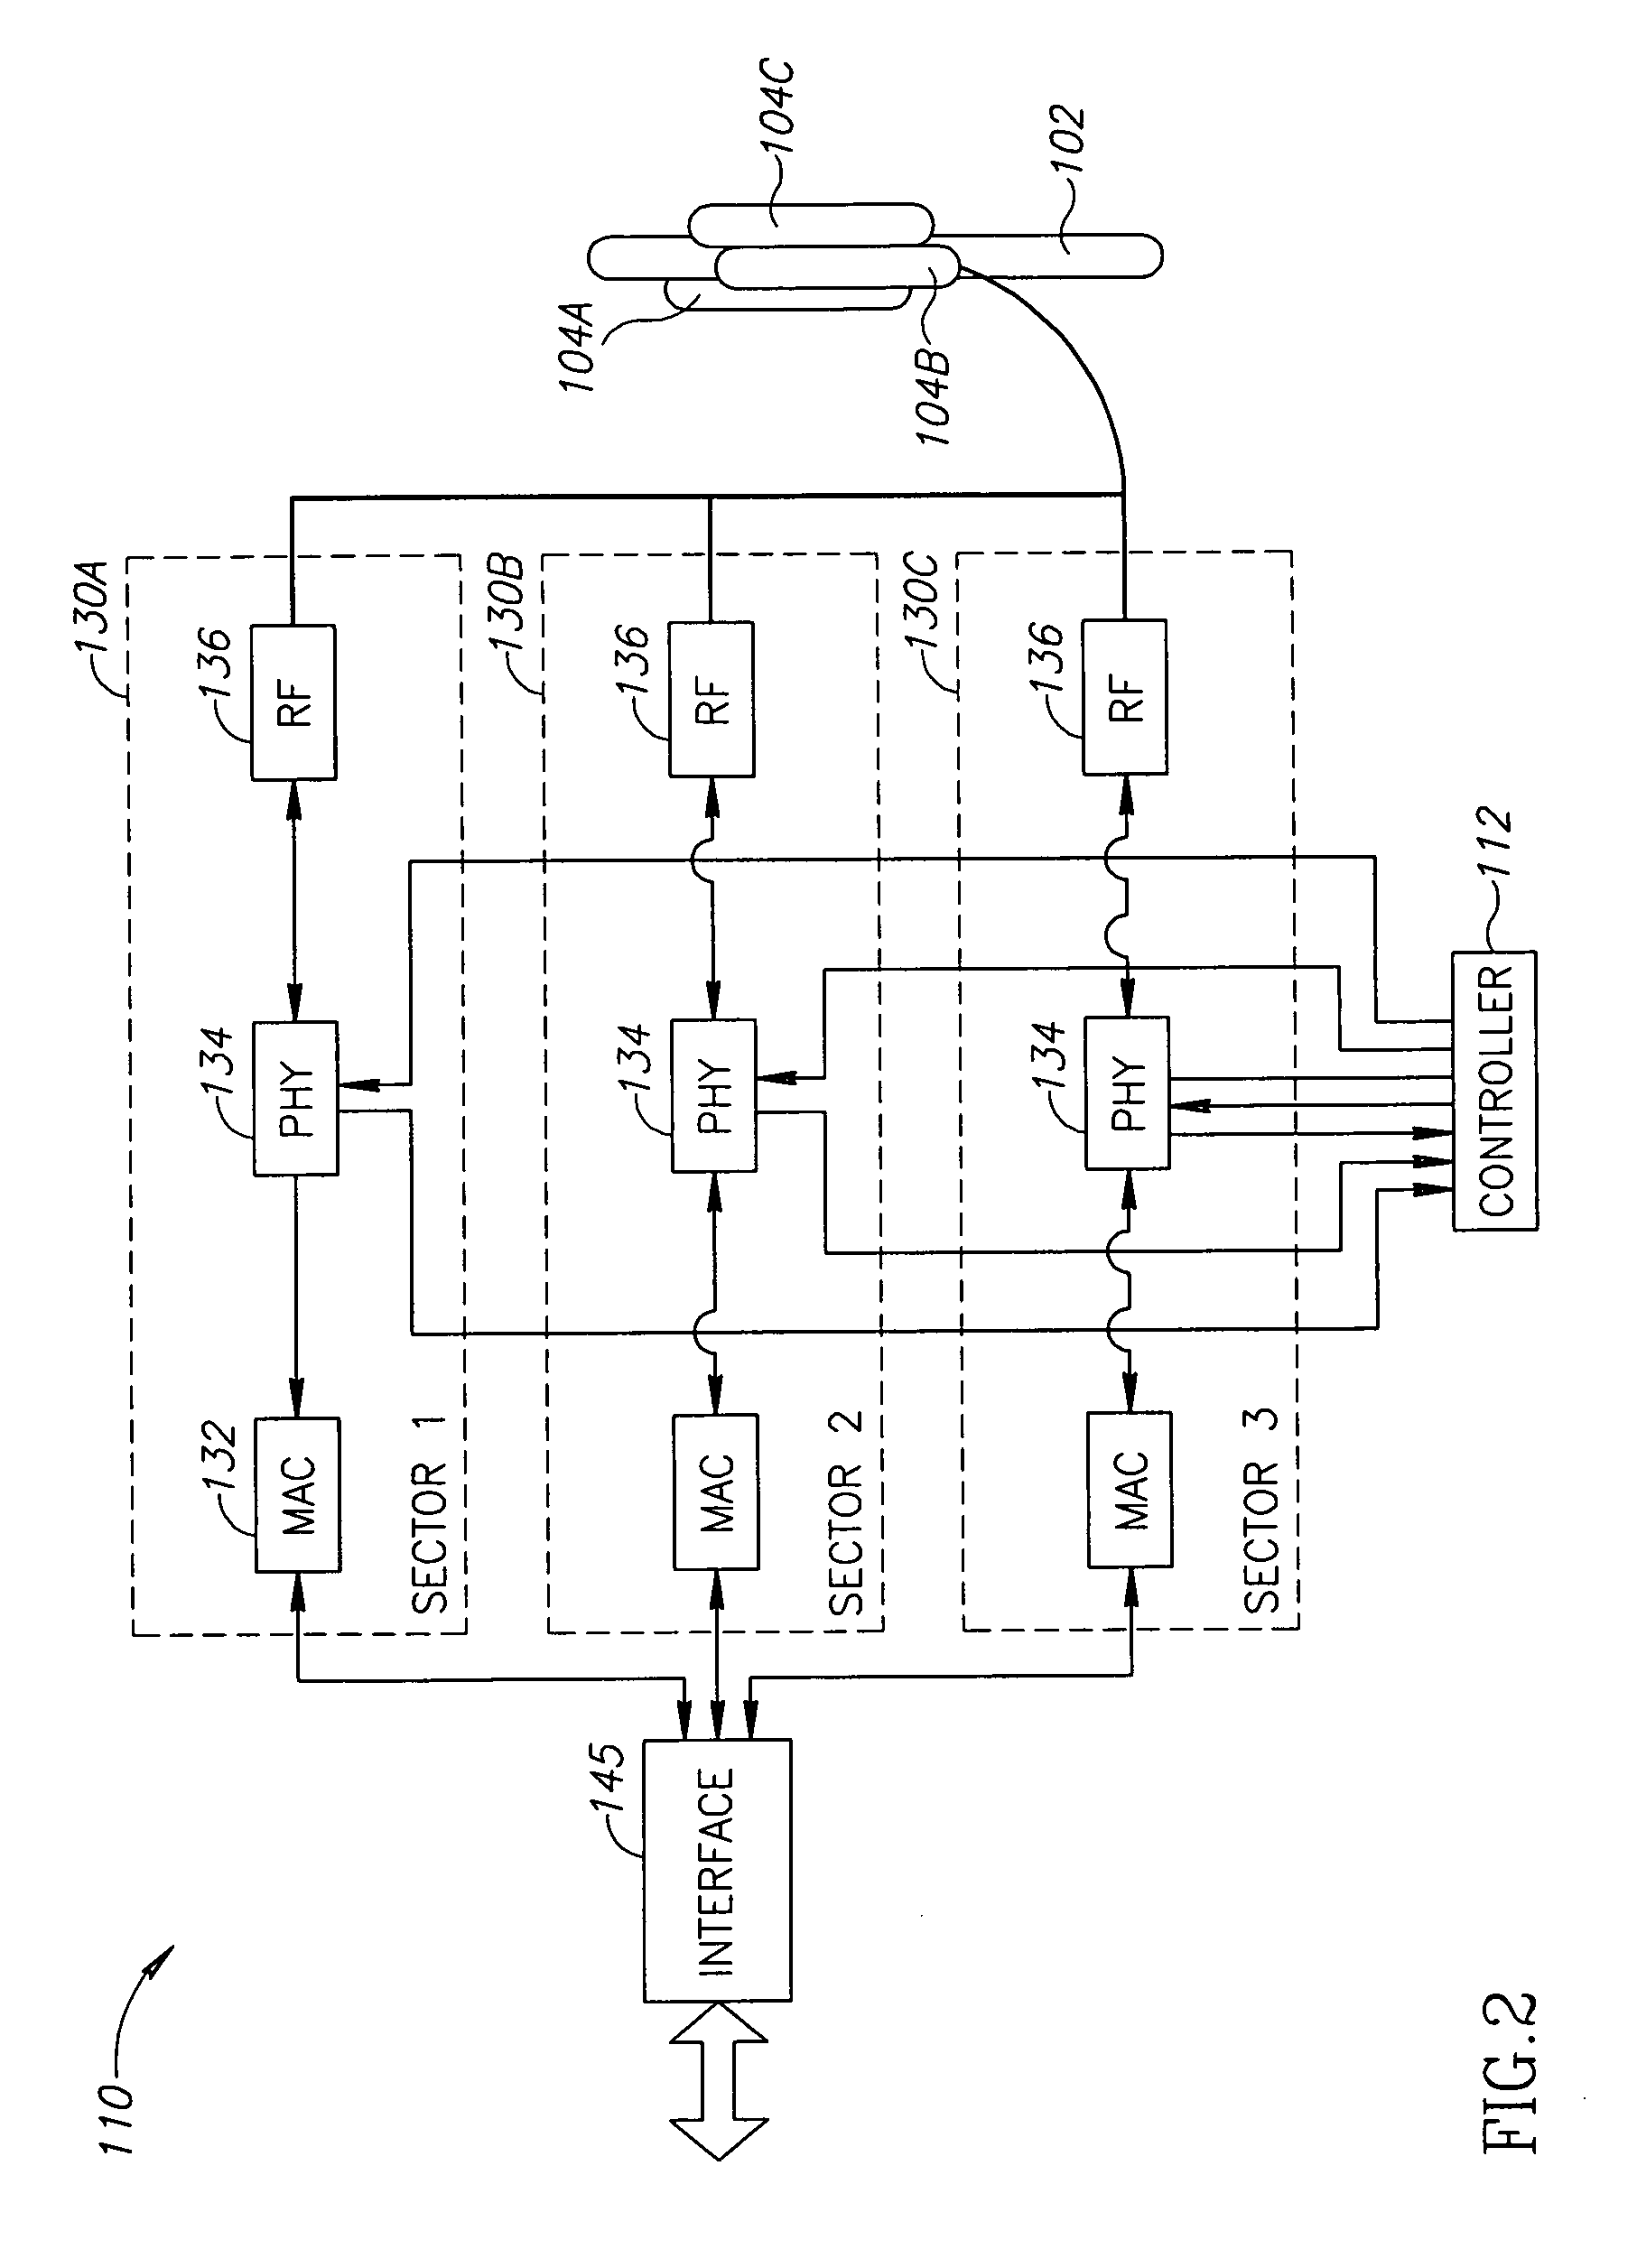 Interference Cancellation in Sector Antenna